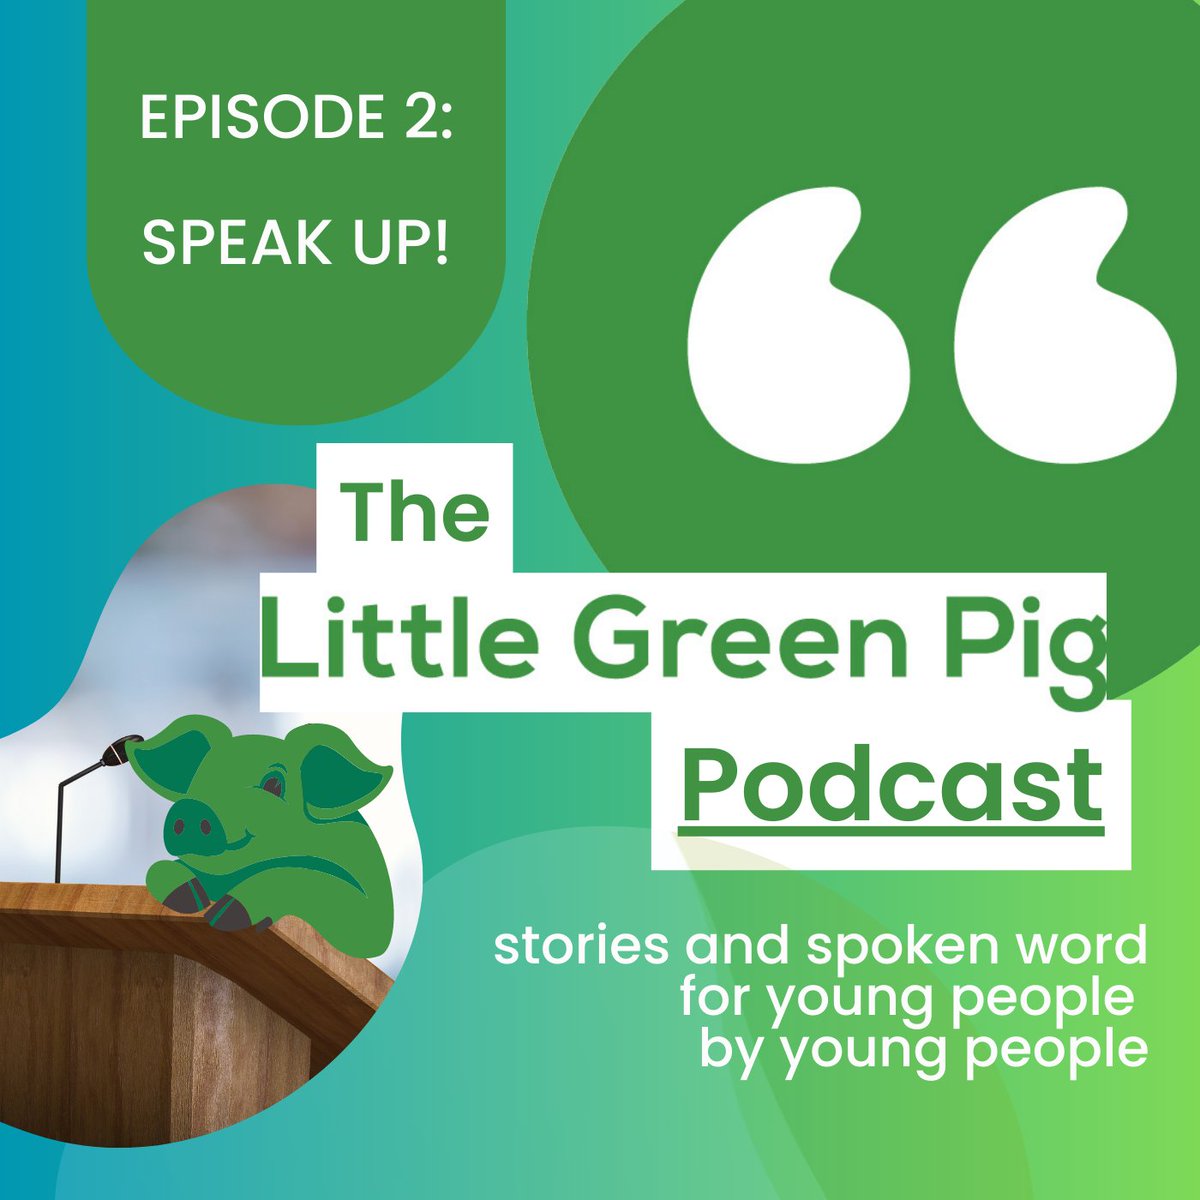 Episode 2 of our Podcast is now available - enjoy! littlegreenpig.org.uk/podcast/speak-…